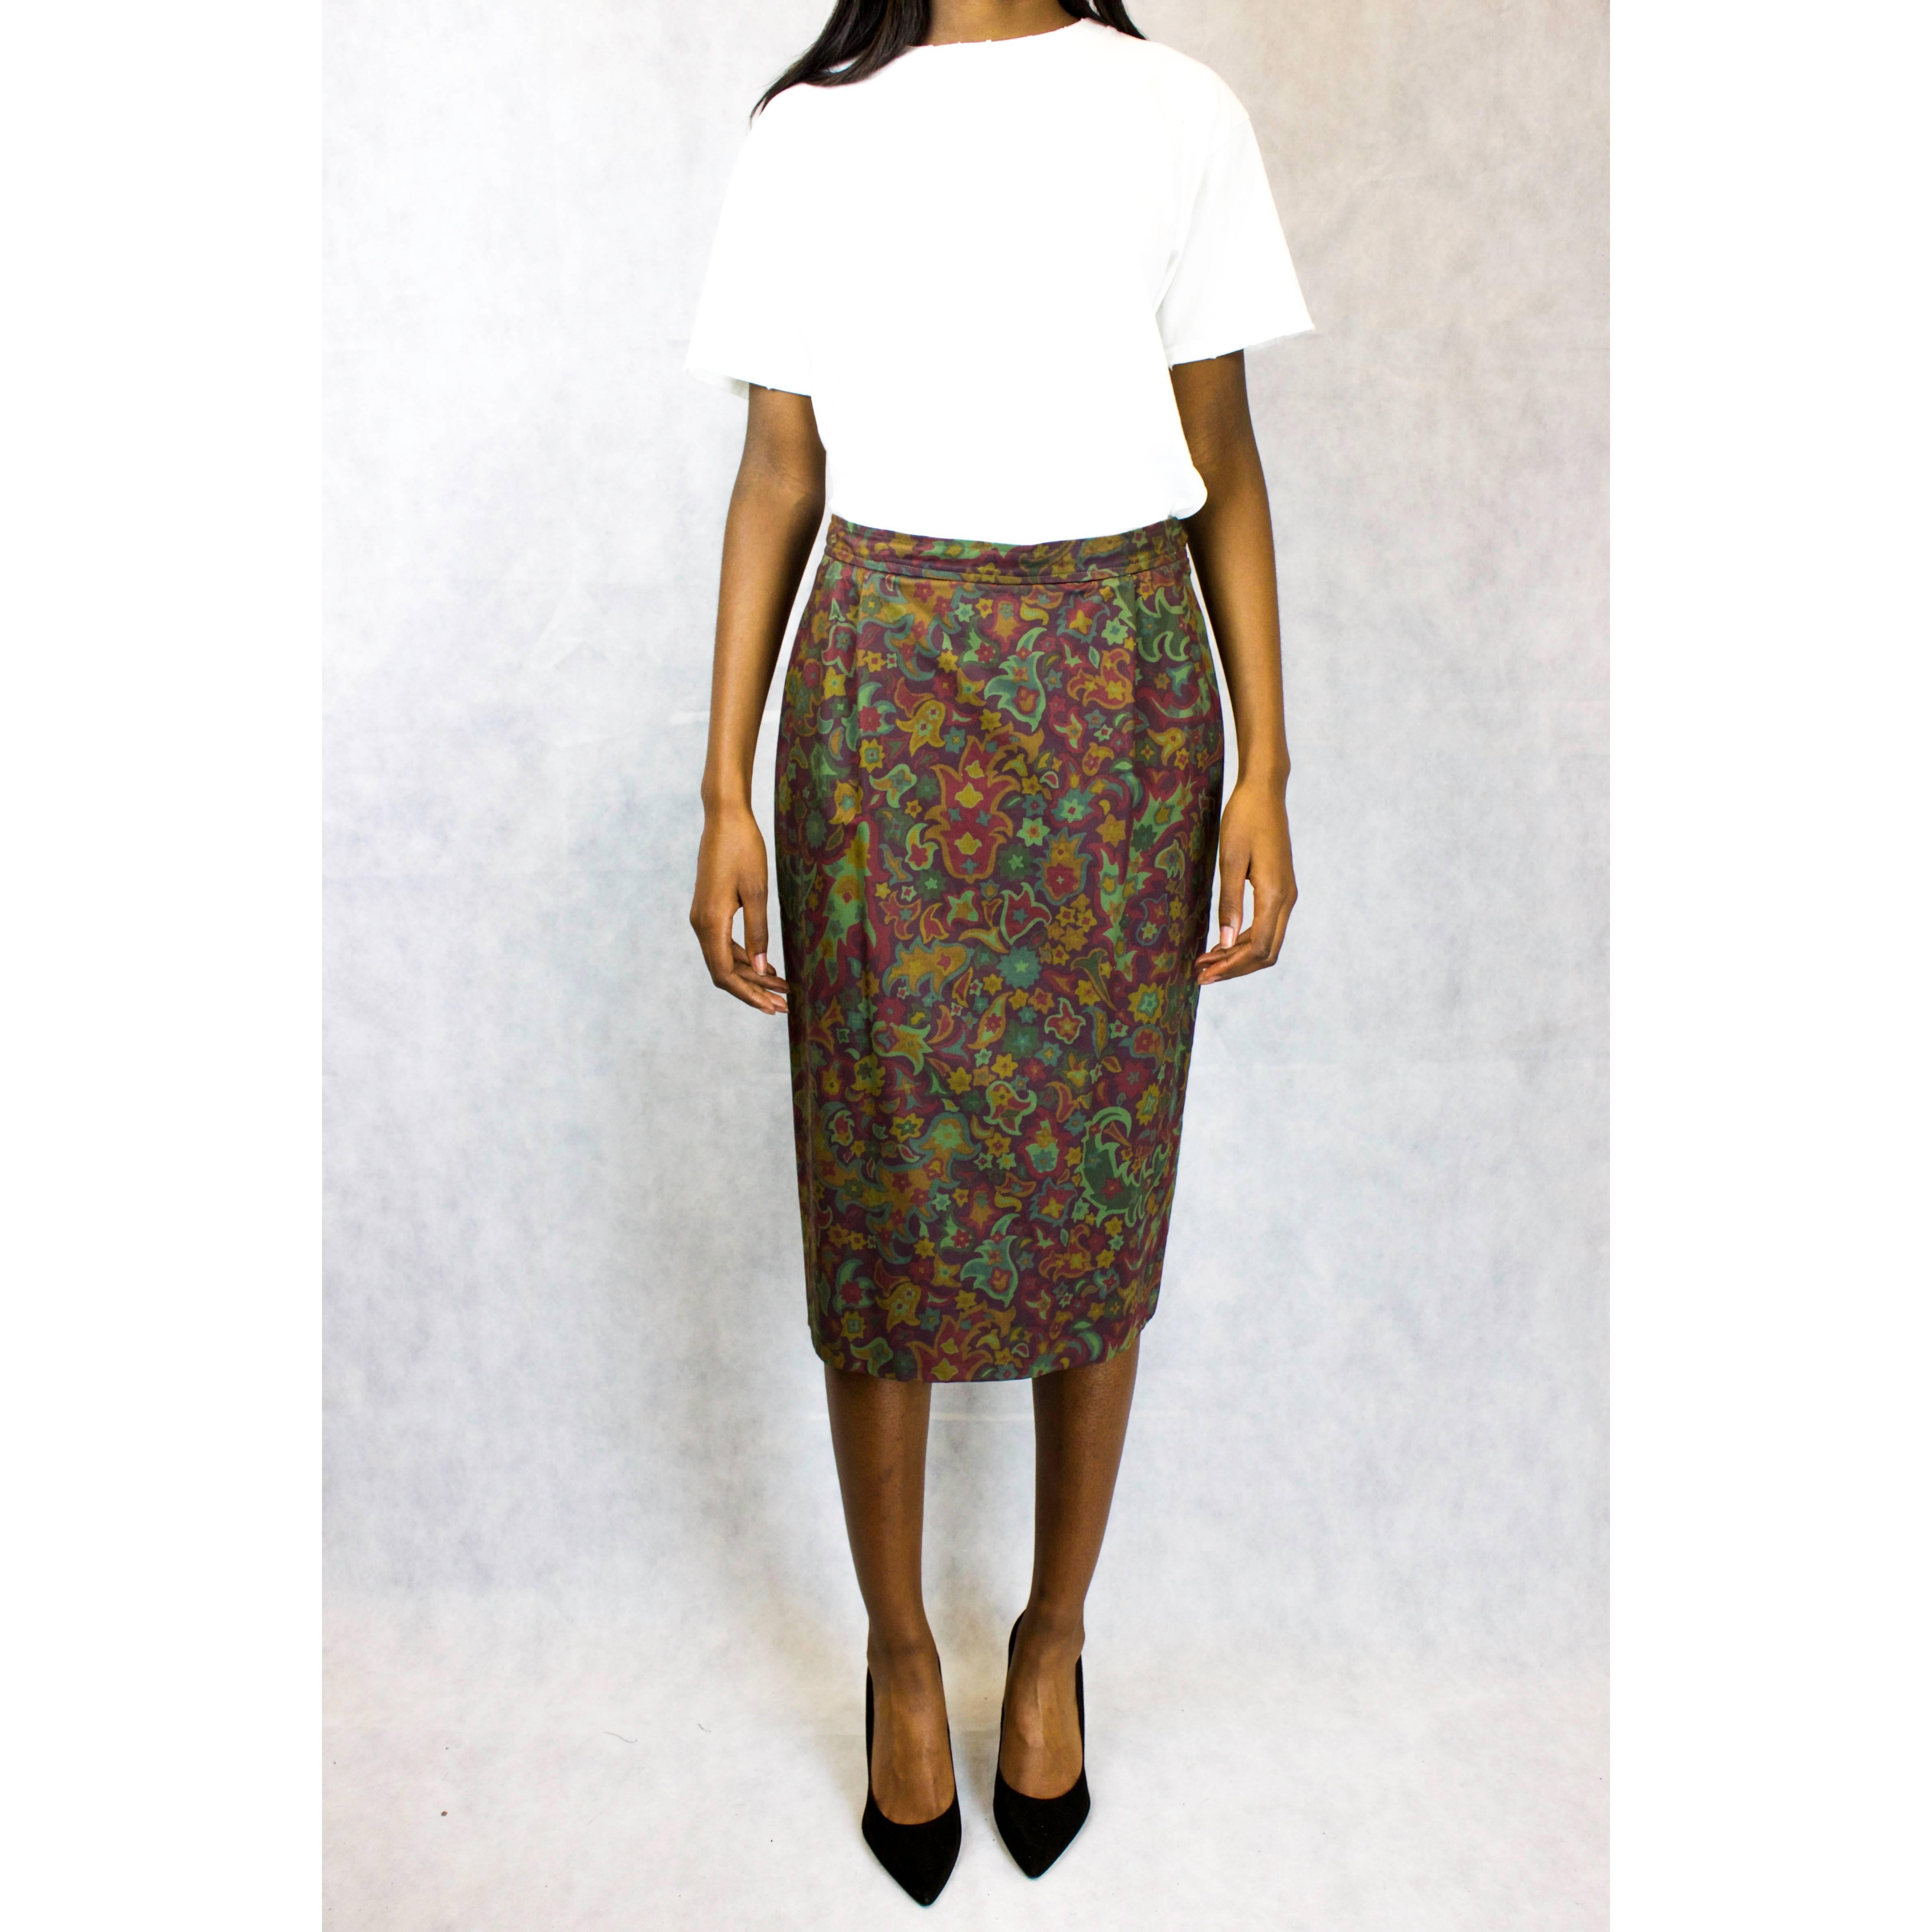 Recognised under the Saint Laurent Rive Gauche label, this straight line “peg-leg” pencil skirt was designed and made circa late 1970. Constructed from cotton with a luxurious wax finish, the skirt has a camouflage inspired paisley print giving the